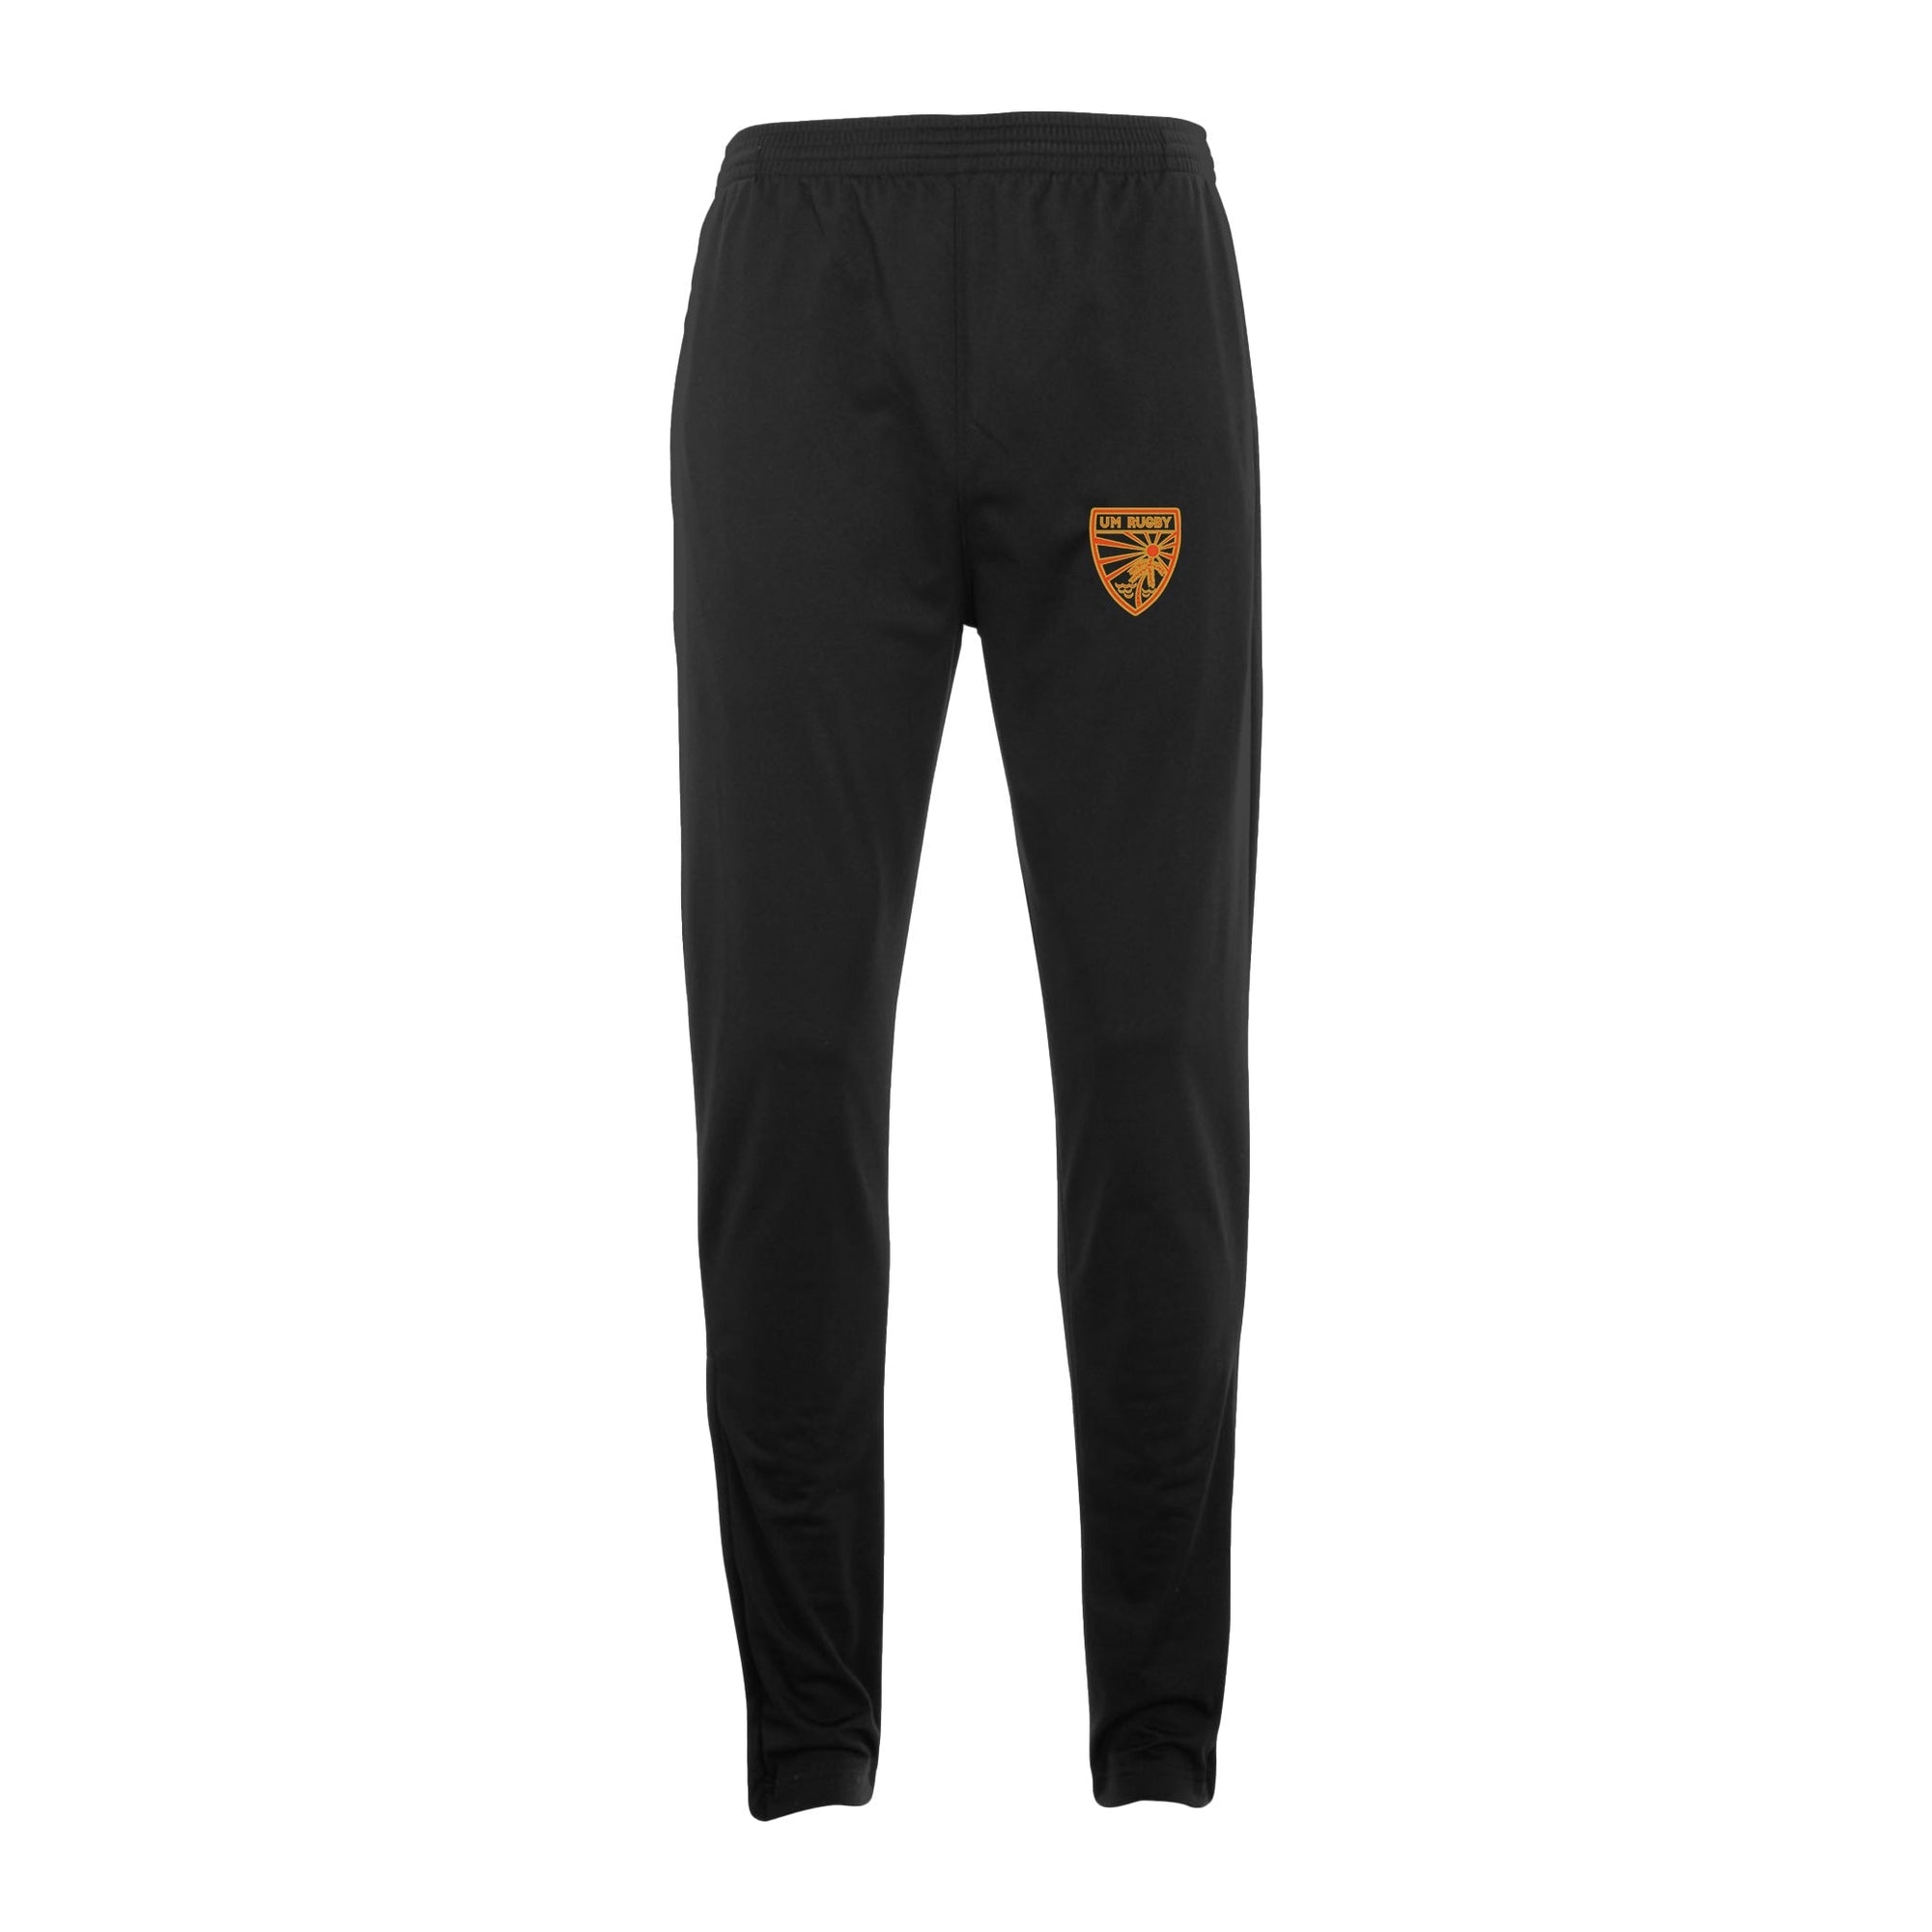 Rugby Imports UMiami Rugby Unisex Tapered Leg Pant